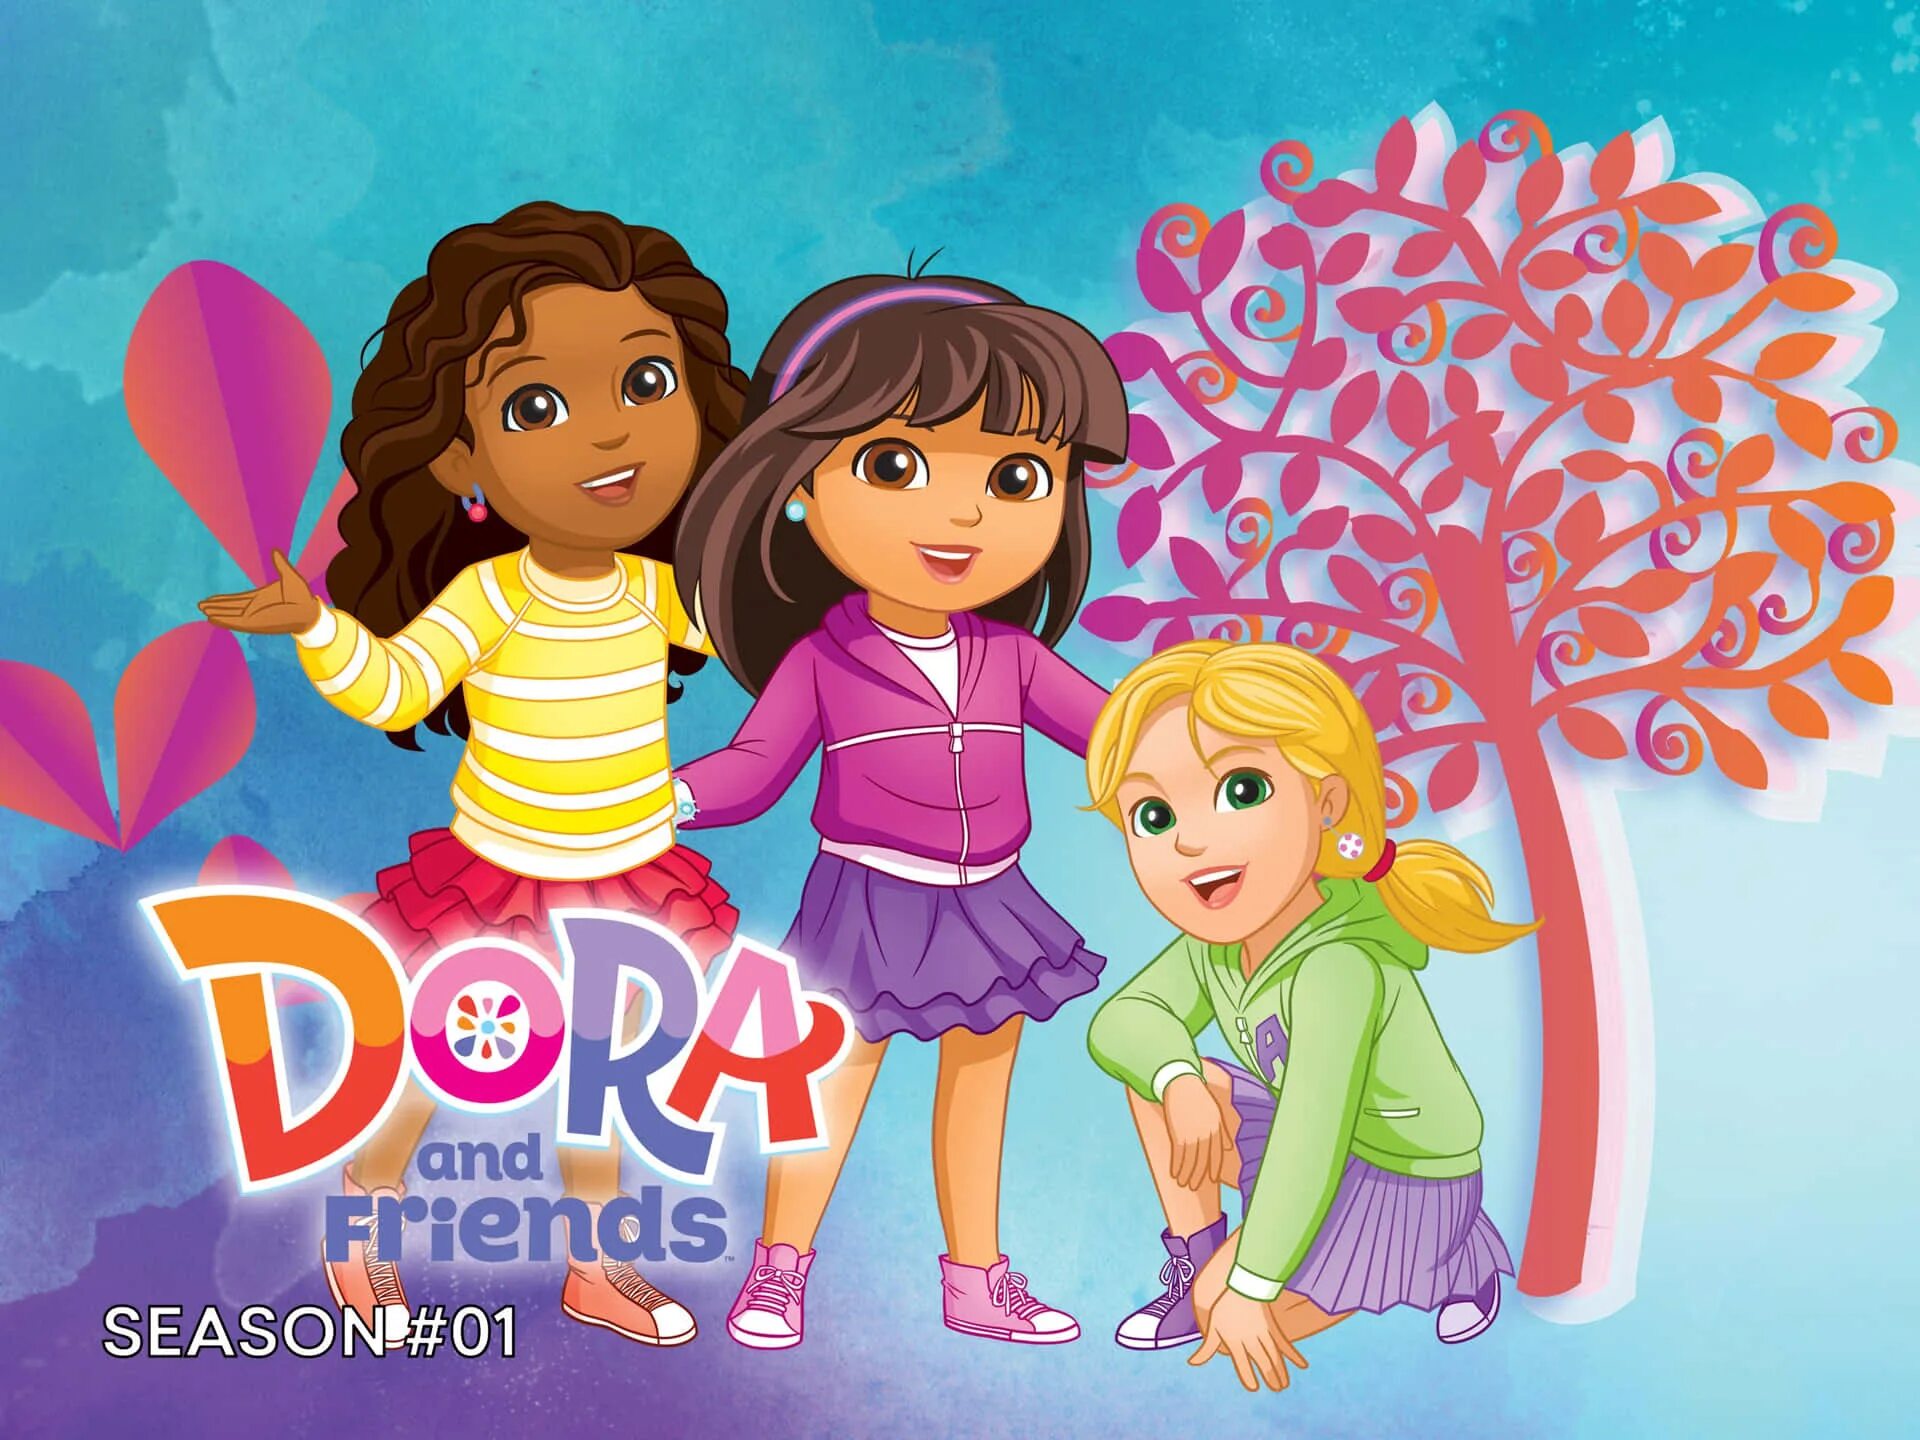 Ready my friend. Dora and friends Кейт. Dora and friends into the City. Санни Дэй Dora and friends. Dora and friends into the City Alana.